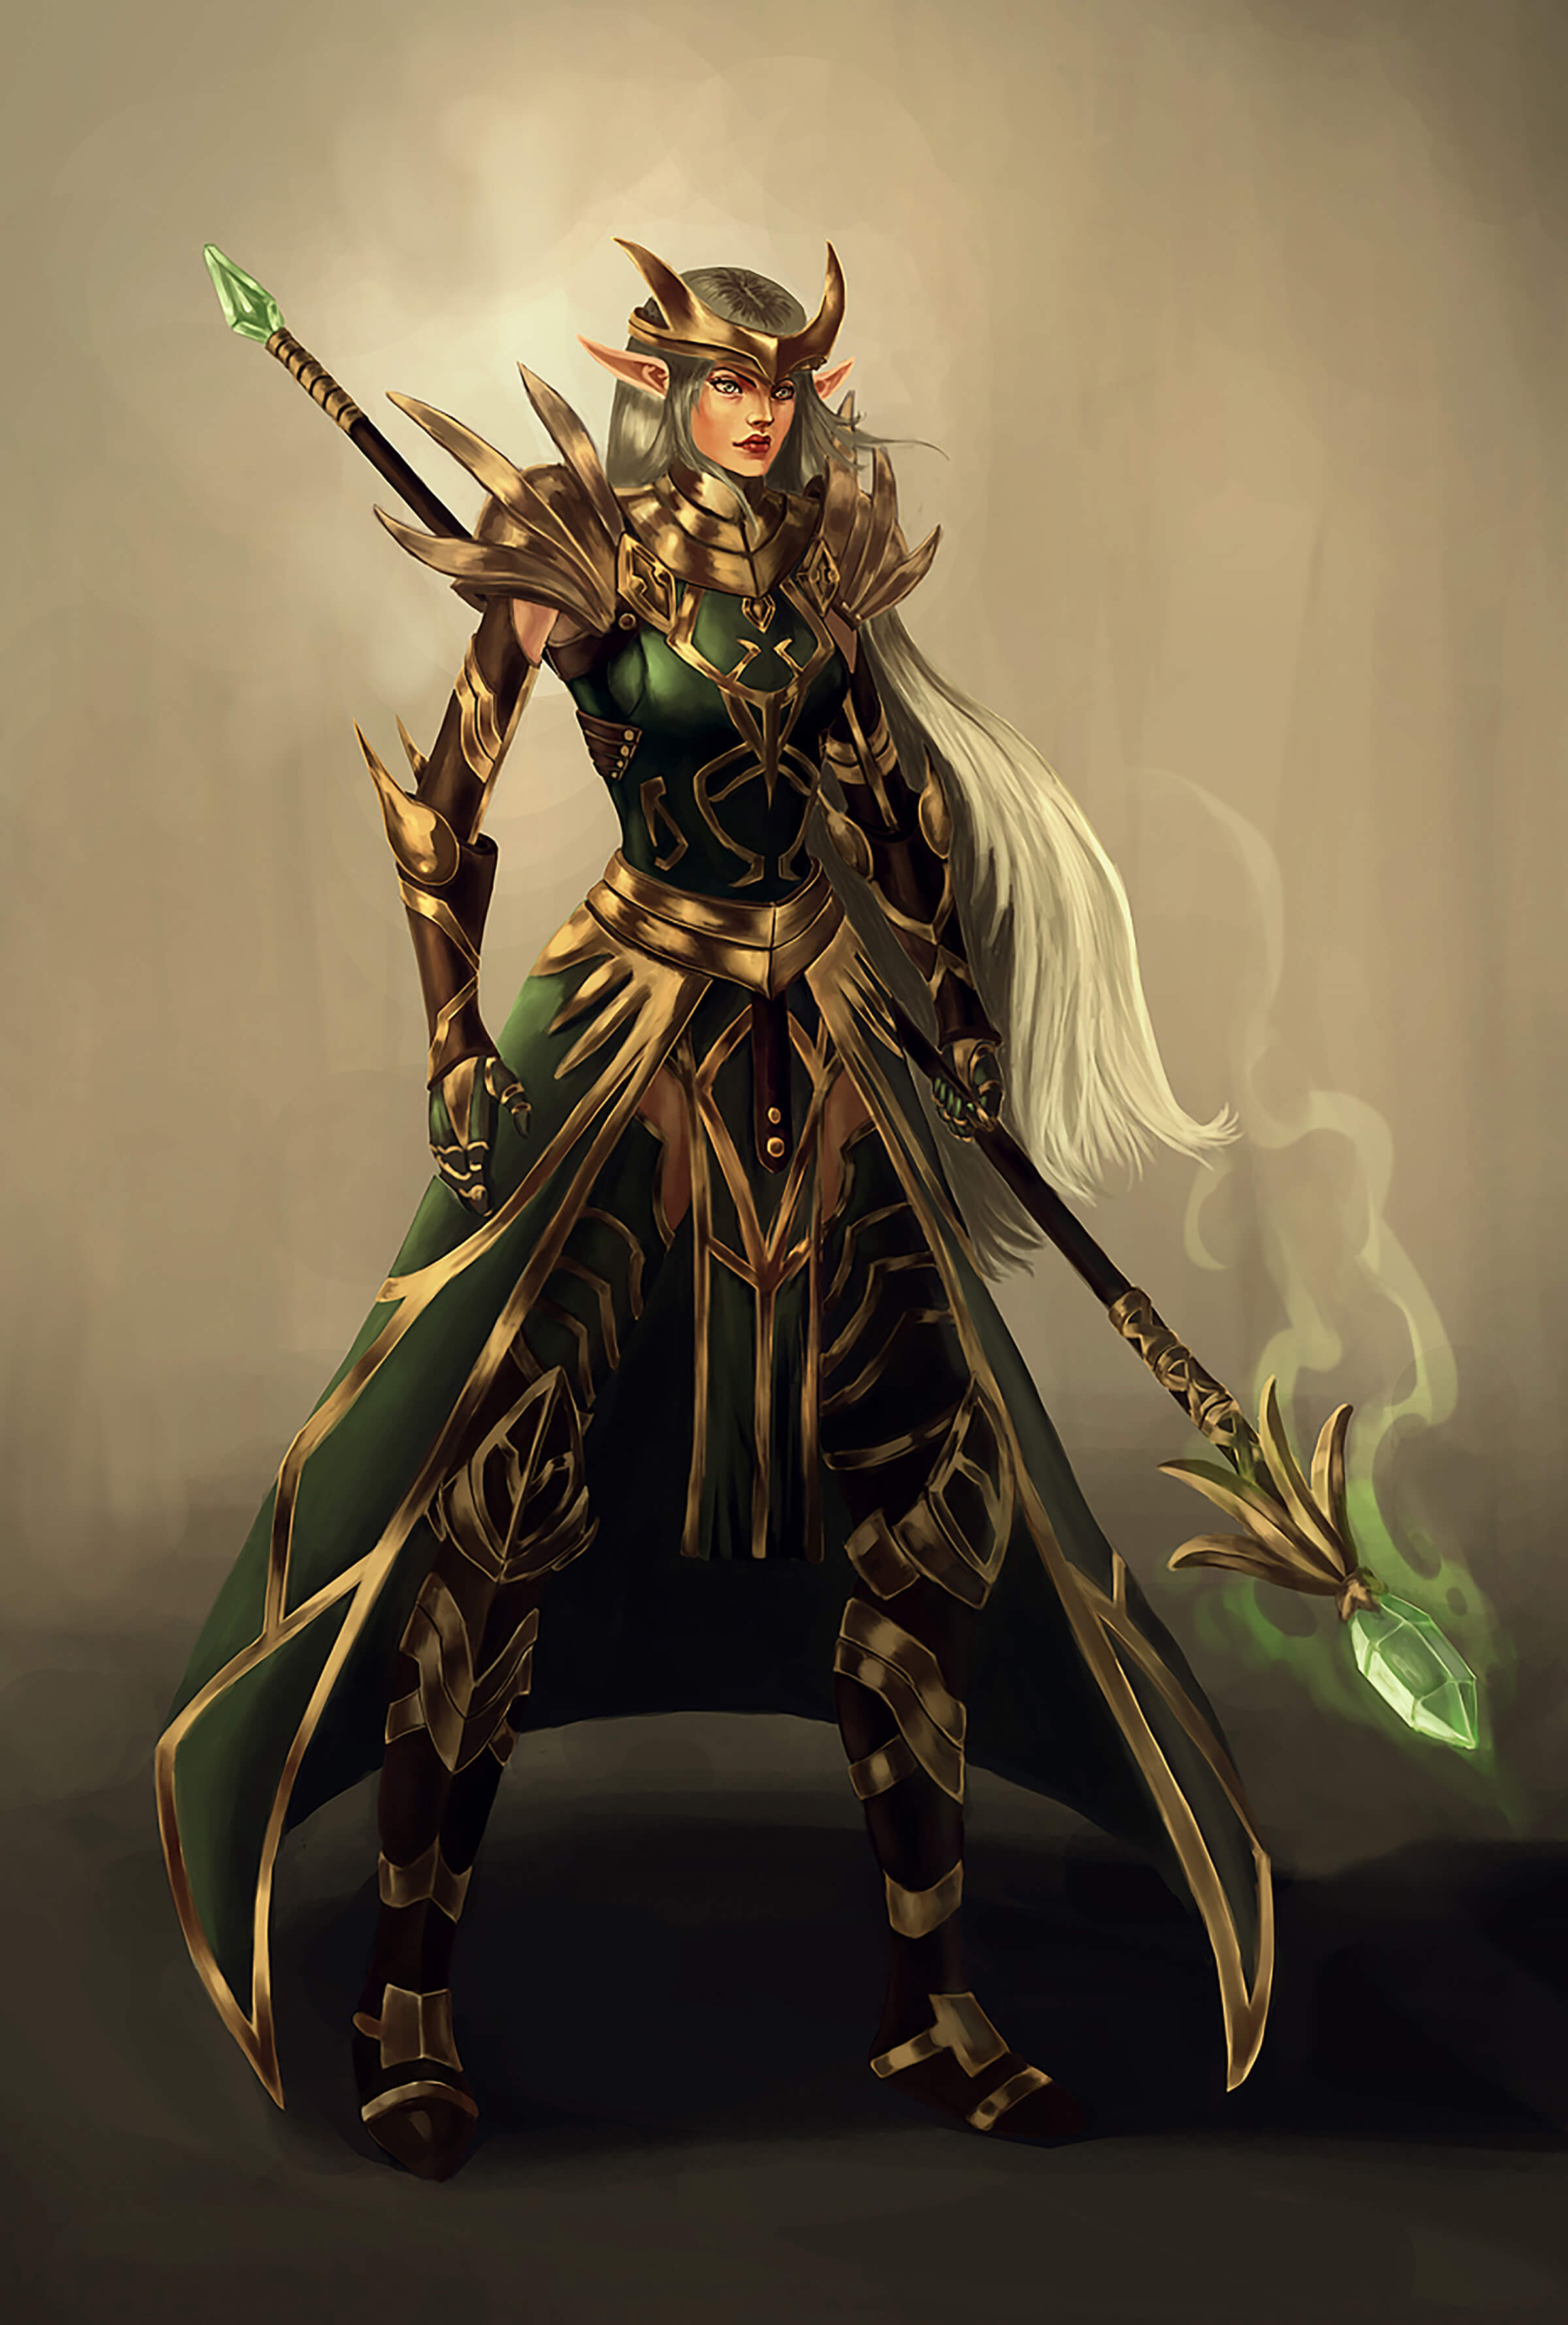 An elvish warrior stands in ornate green and gold armor holding a long staff topped by an emerald gem wafting magical vapors.